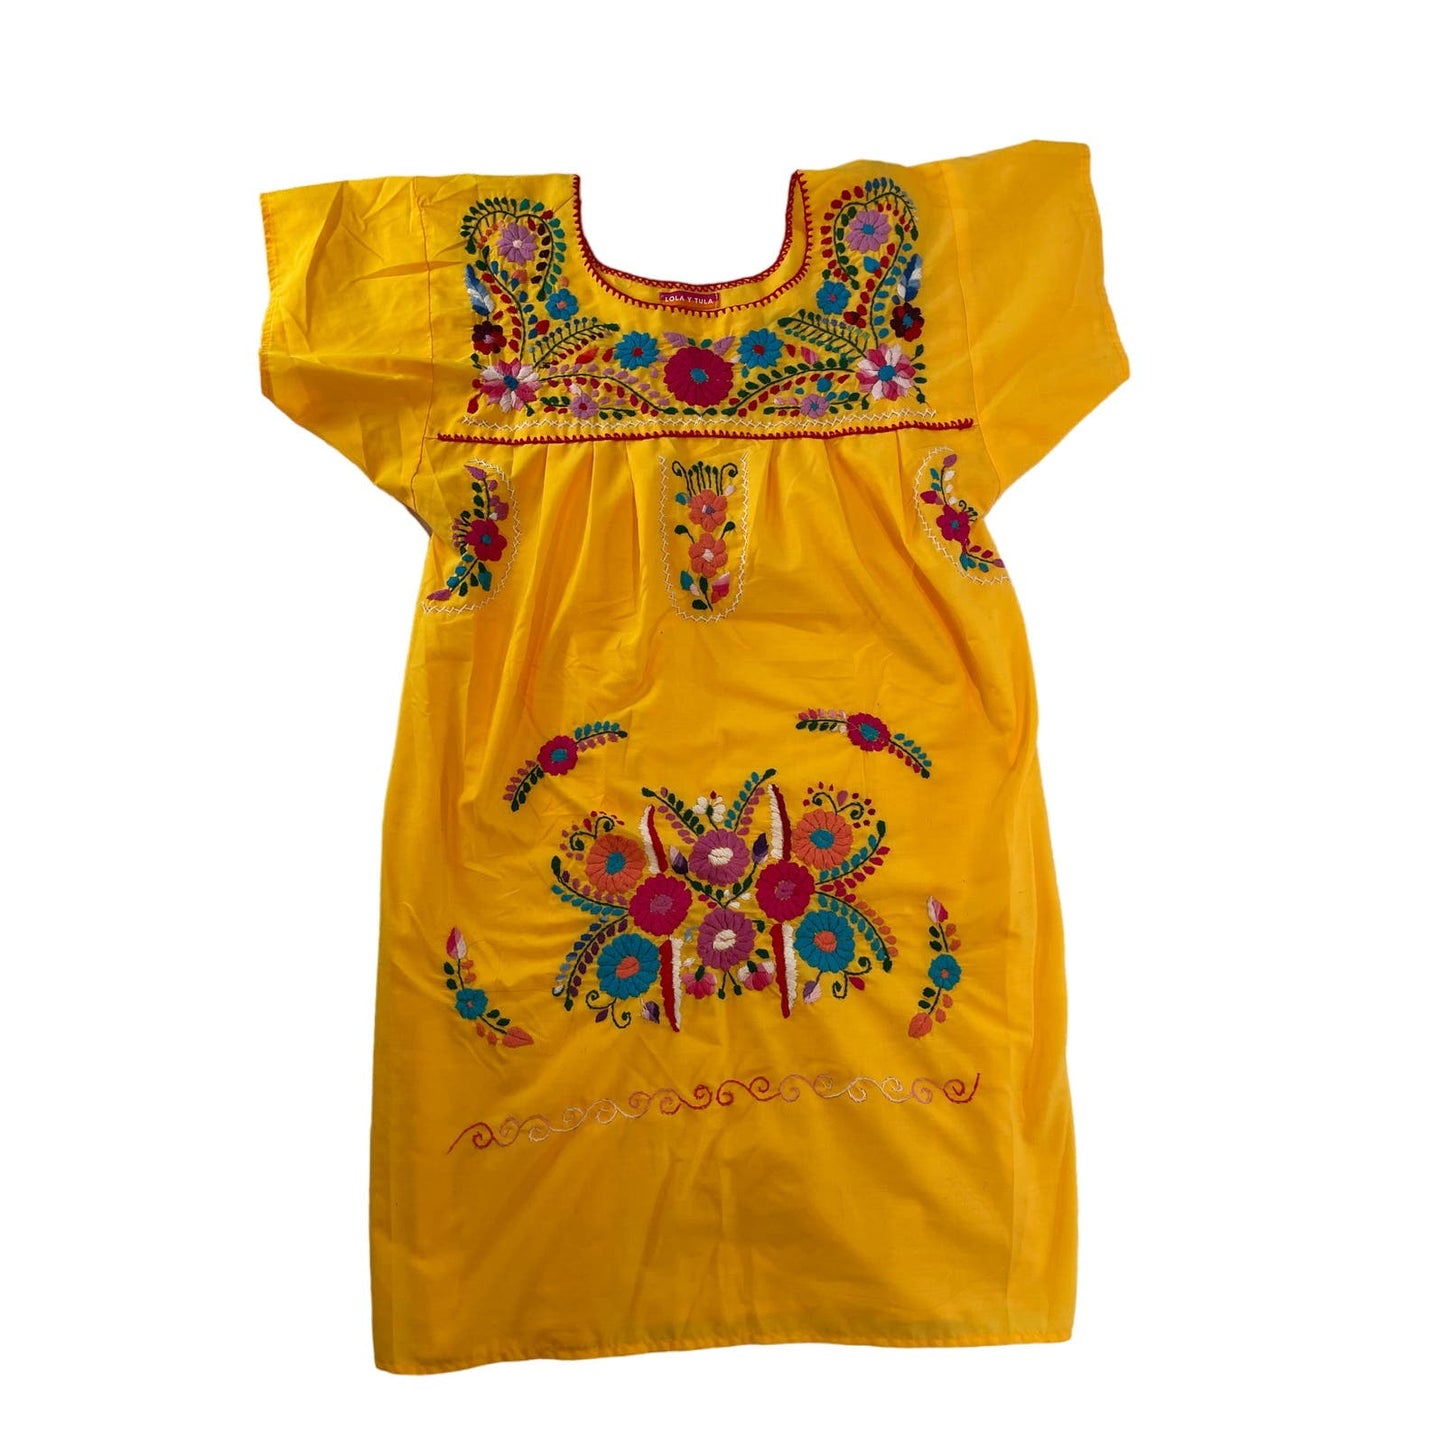 Lola Y Tula Women's Hand Embroidered Yellow Dress Size Med/Large $98 MSRP